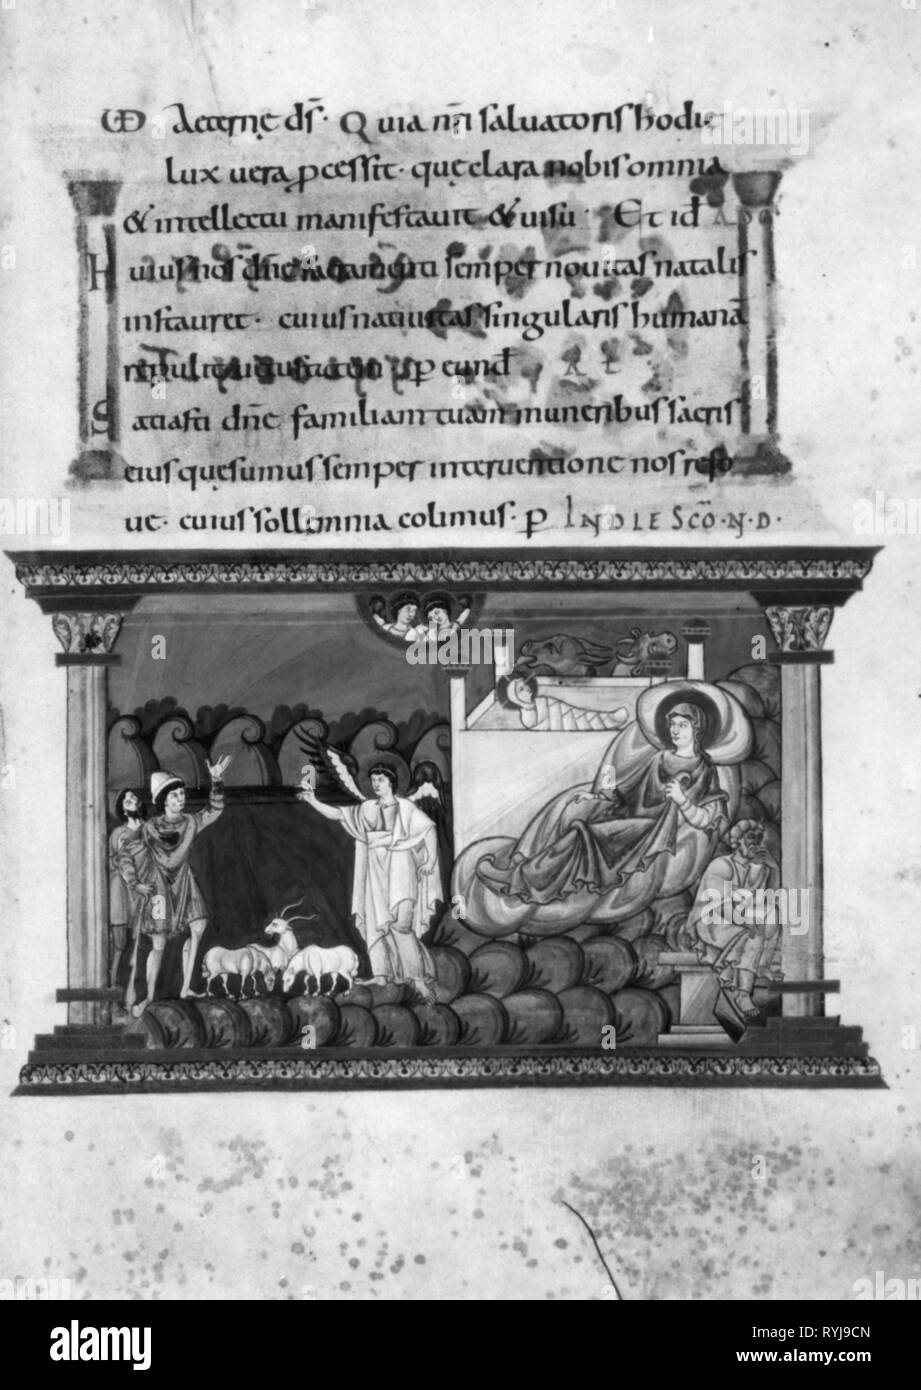 religion, Christianity, Jesus Christ, nativity, 'Adoration of the Child', illumination, sacramentary, Fulda, first quarter 12th century, Middle Ages, medieval, mediaeval, fine arts, religious art, art of painting, illustration, Messiah, Saviour, Redeemer, half-length, half length, Mary, Madonna, herdsman, herder, herdsmen, herders, stable, barn, barnstable, stables, barns, barnstables, adoration, adoring, adore, worshiping, the infant Jesus, baby Jesus, divine infant, angel, angels, ox, oxen, donkey, donkeys, shepherd, shepherds, worship, worship, Additional-Rights-Clearance-Info-Not-Available Stock Photo